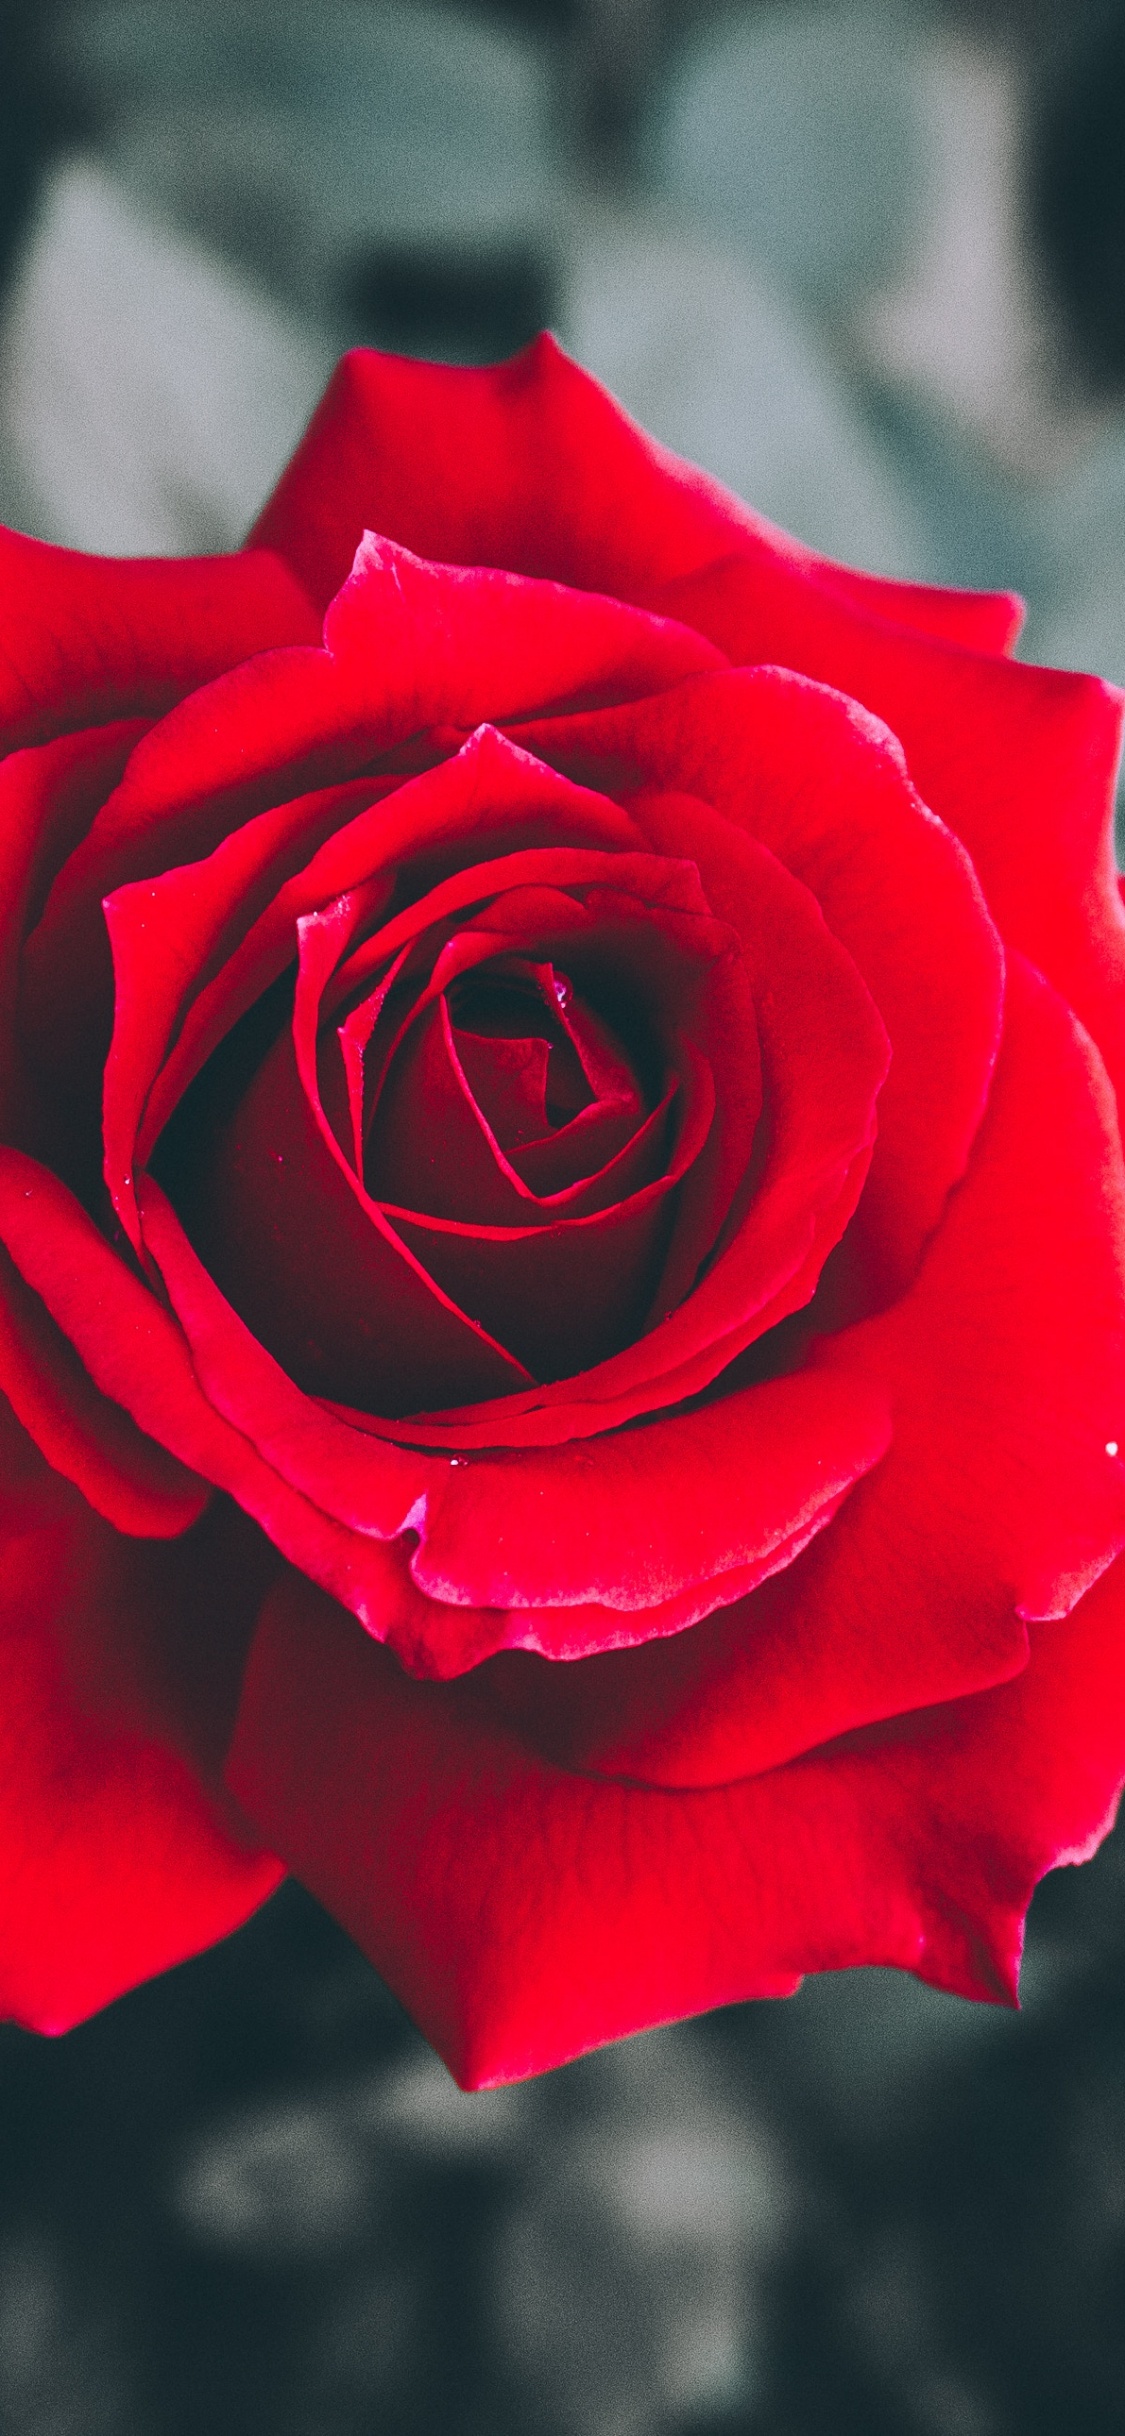 Red Rose in Bloom in Close up Photography. Wallpaper in 1125x2436 Resolution